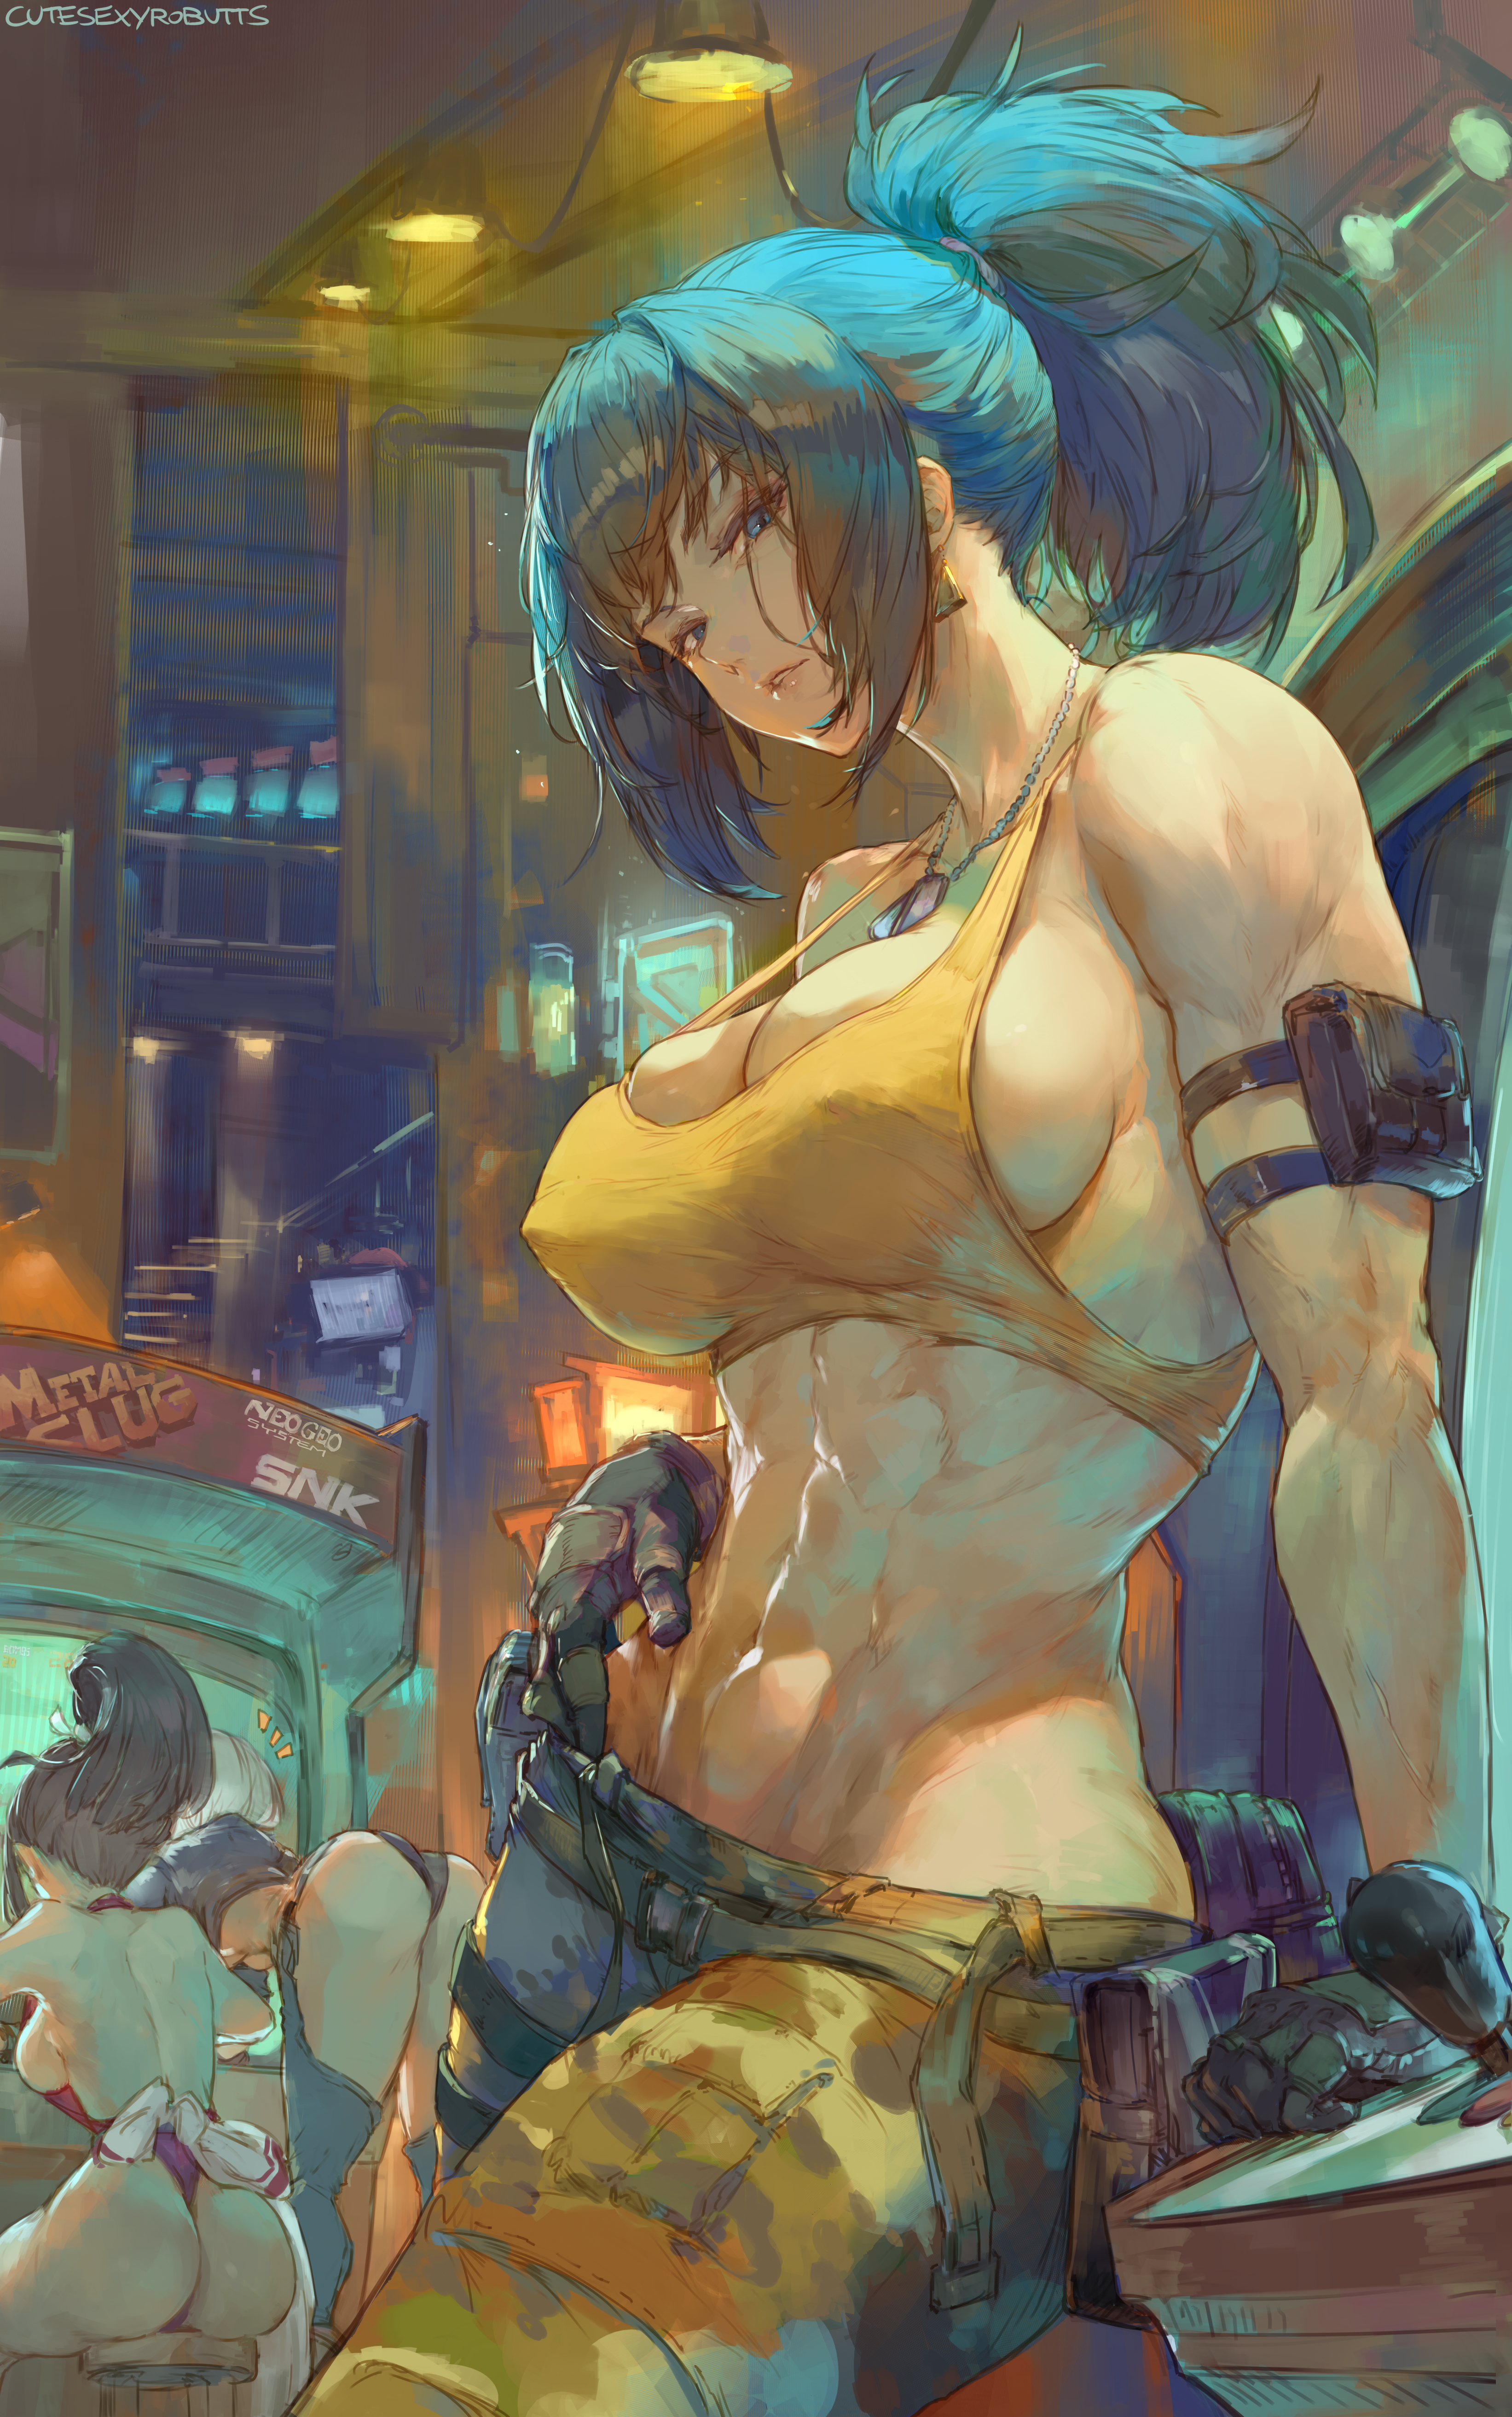 General 3285x5250 Leona Heidern Angel (KOF) King of Fighters video games video game girls video game characters fighting games 2D artwork drawing fan art Cutesexyrobutts SNK big boobs portrait display ponytail looking at viewer sideboob belly abs blue hair blue eyes ass bareback sitting bent over Mai Shiranui